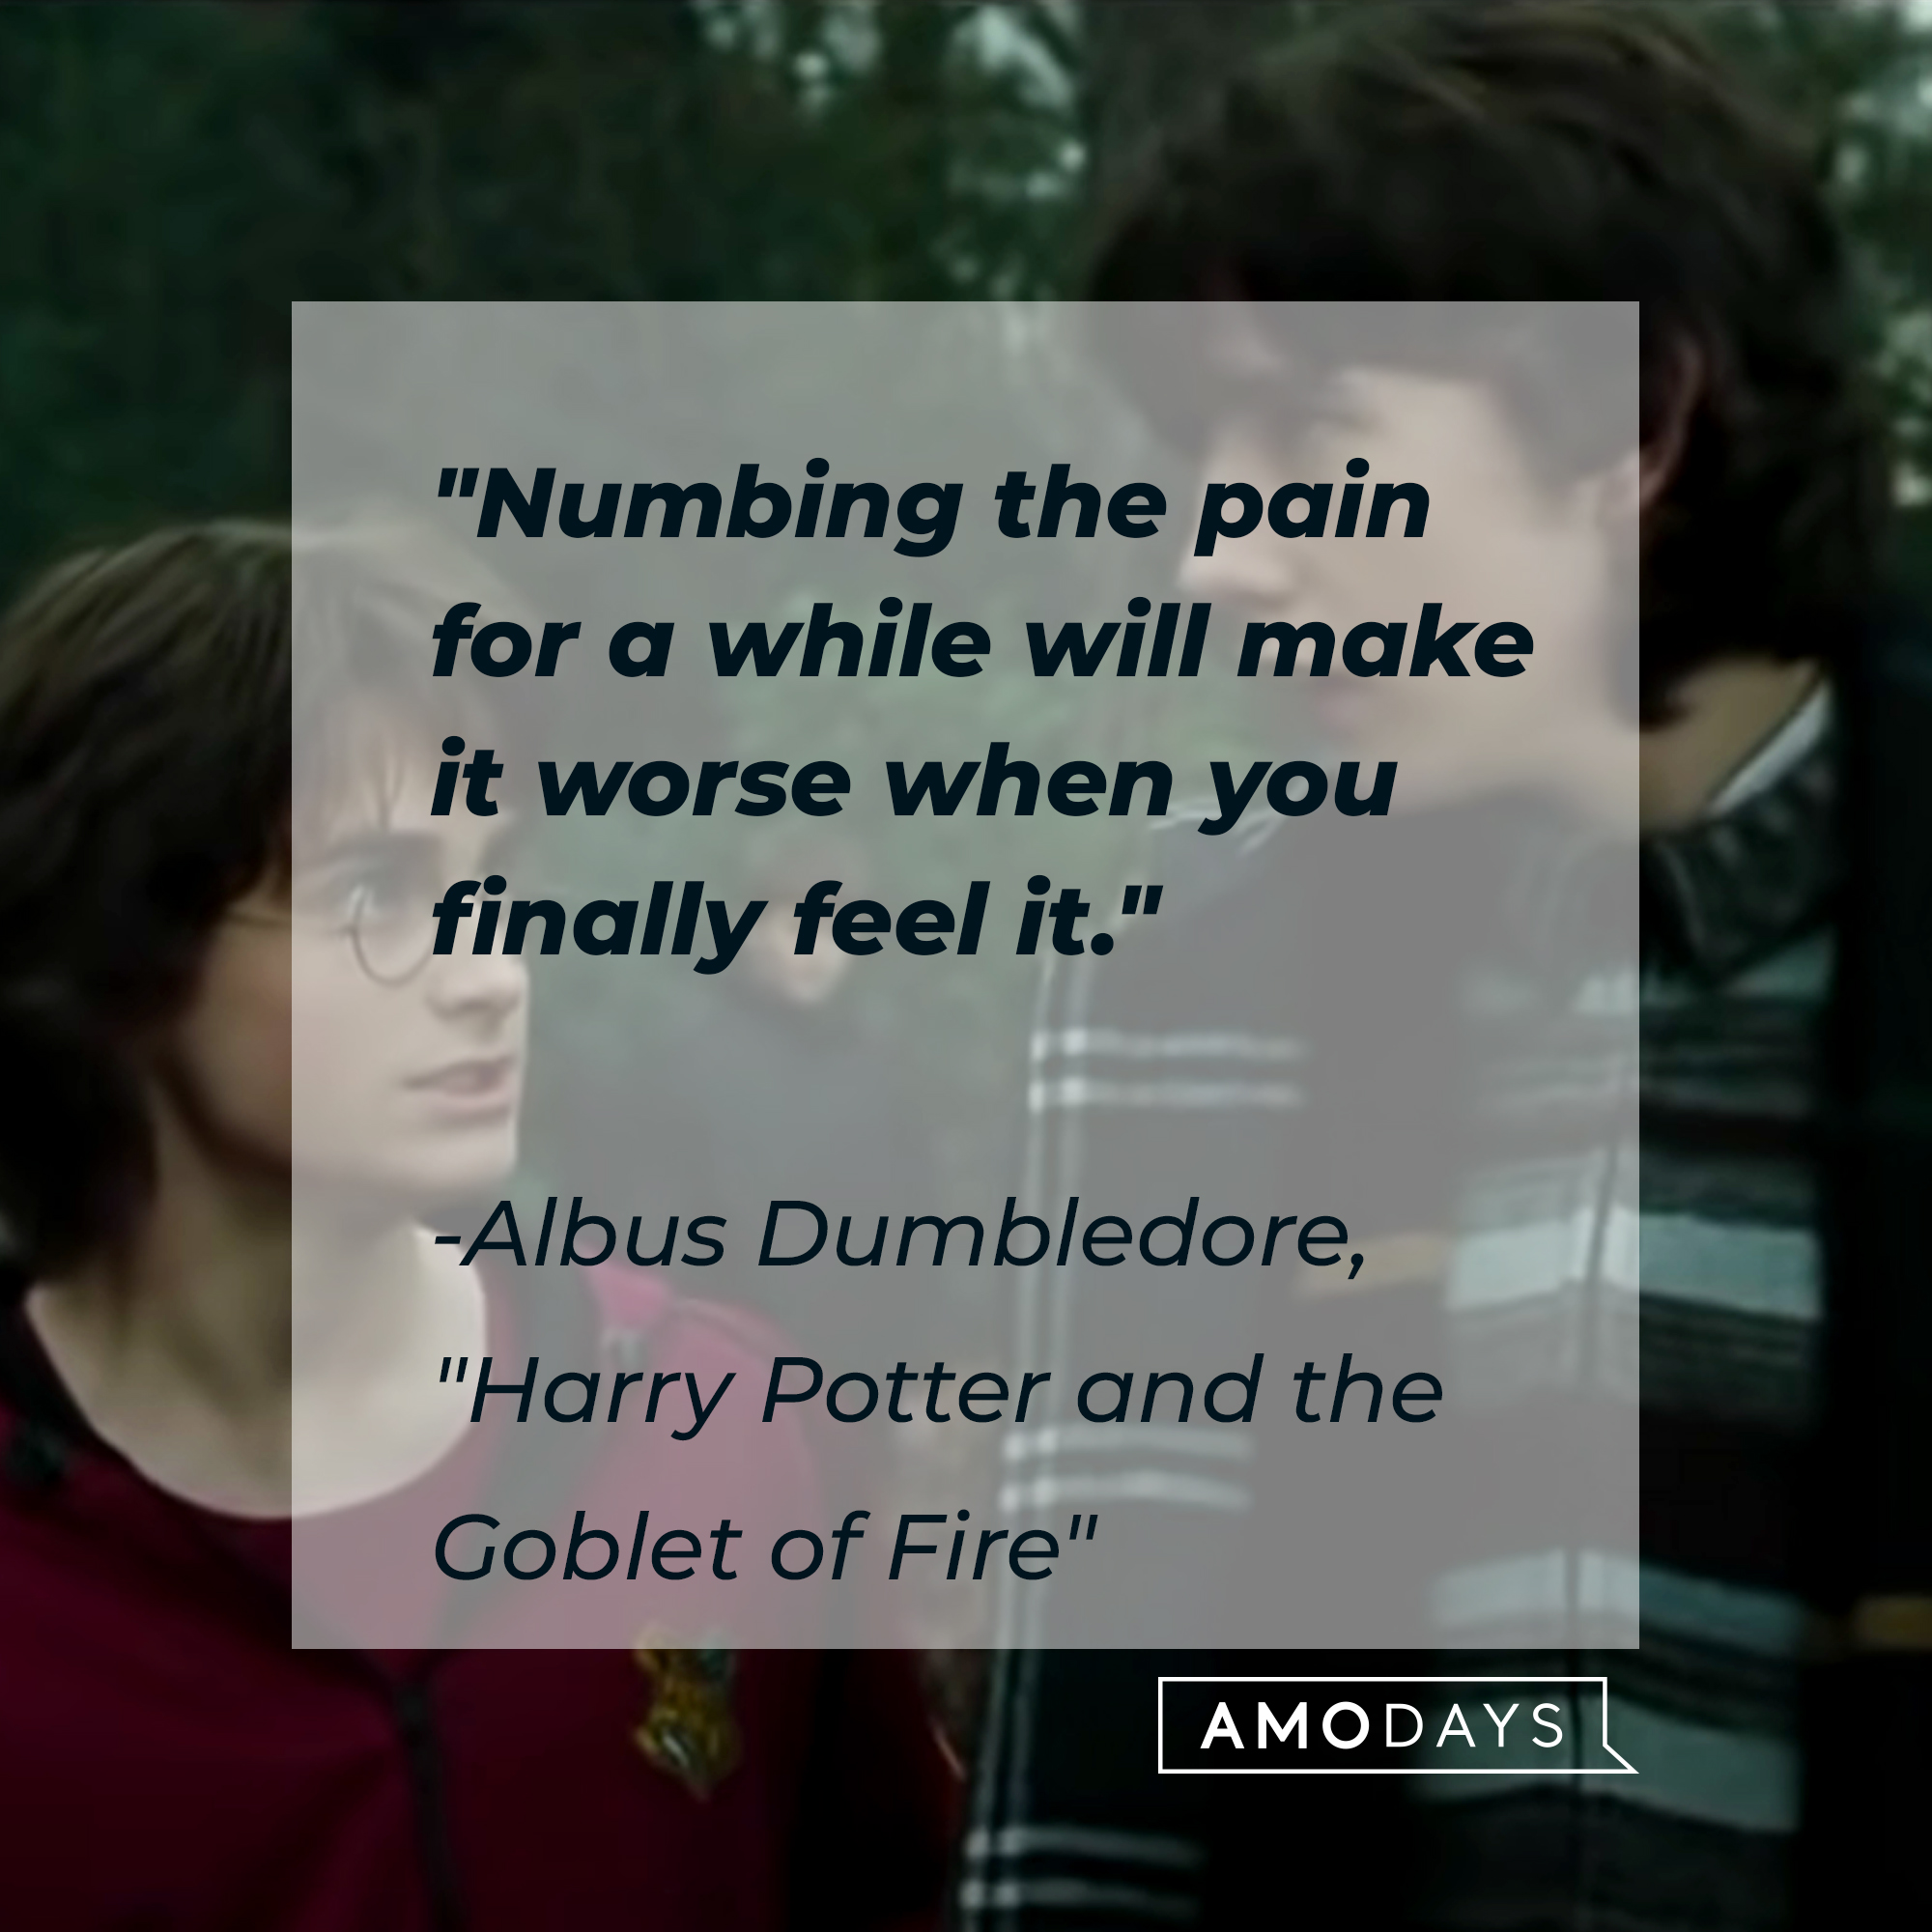 Neville Longbottom with his Albus Dumbledore's quote: "Numbing the pain for a while will make it worse when you finally feel it." | Source: Facebook.com/harrypotter